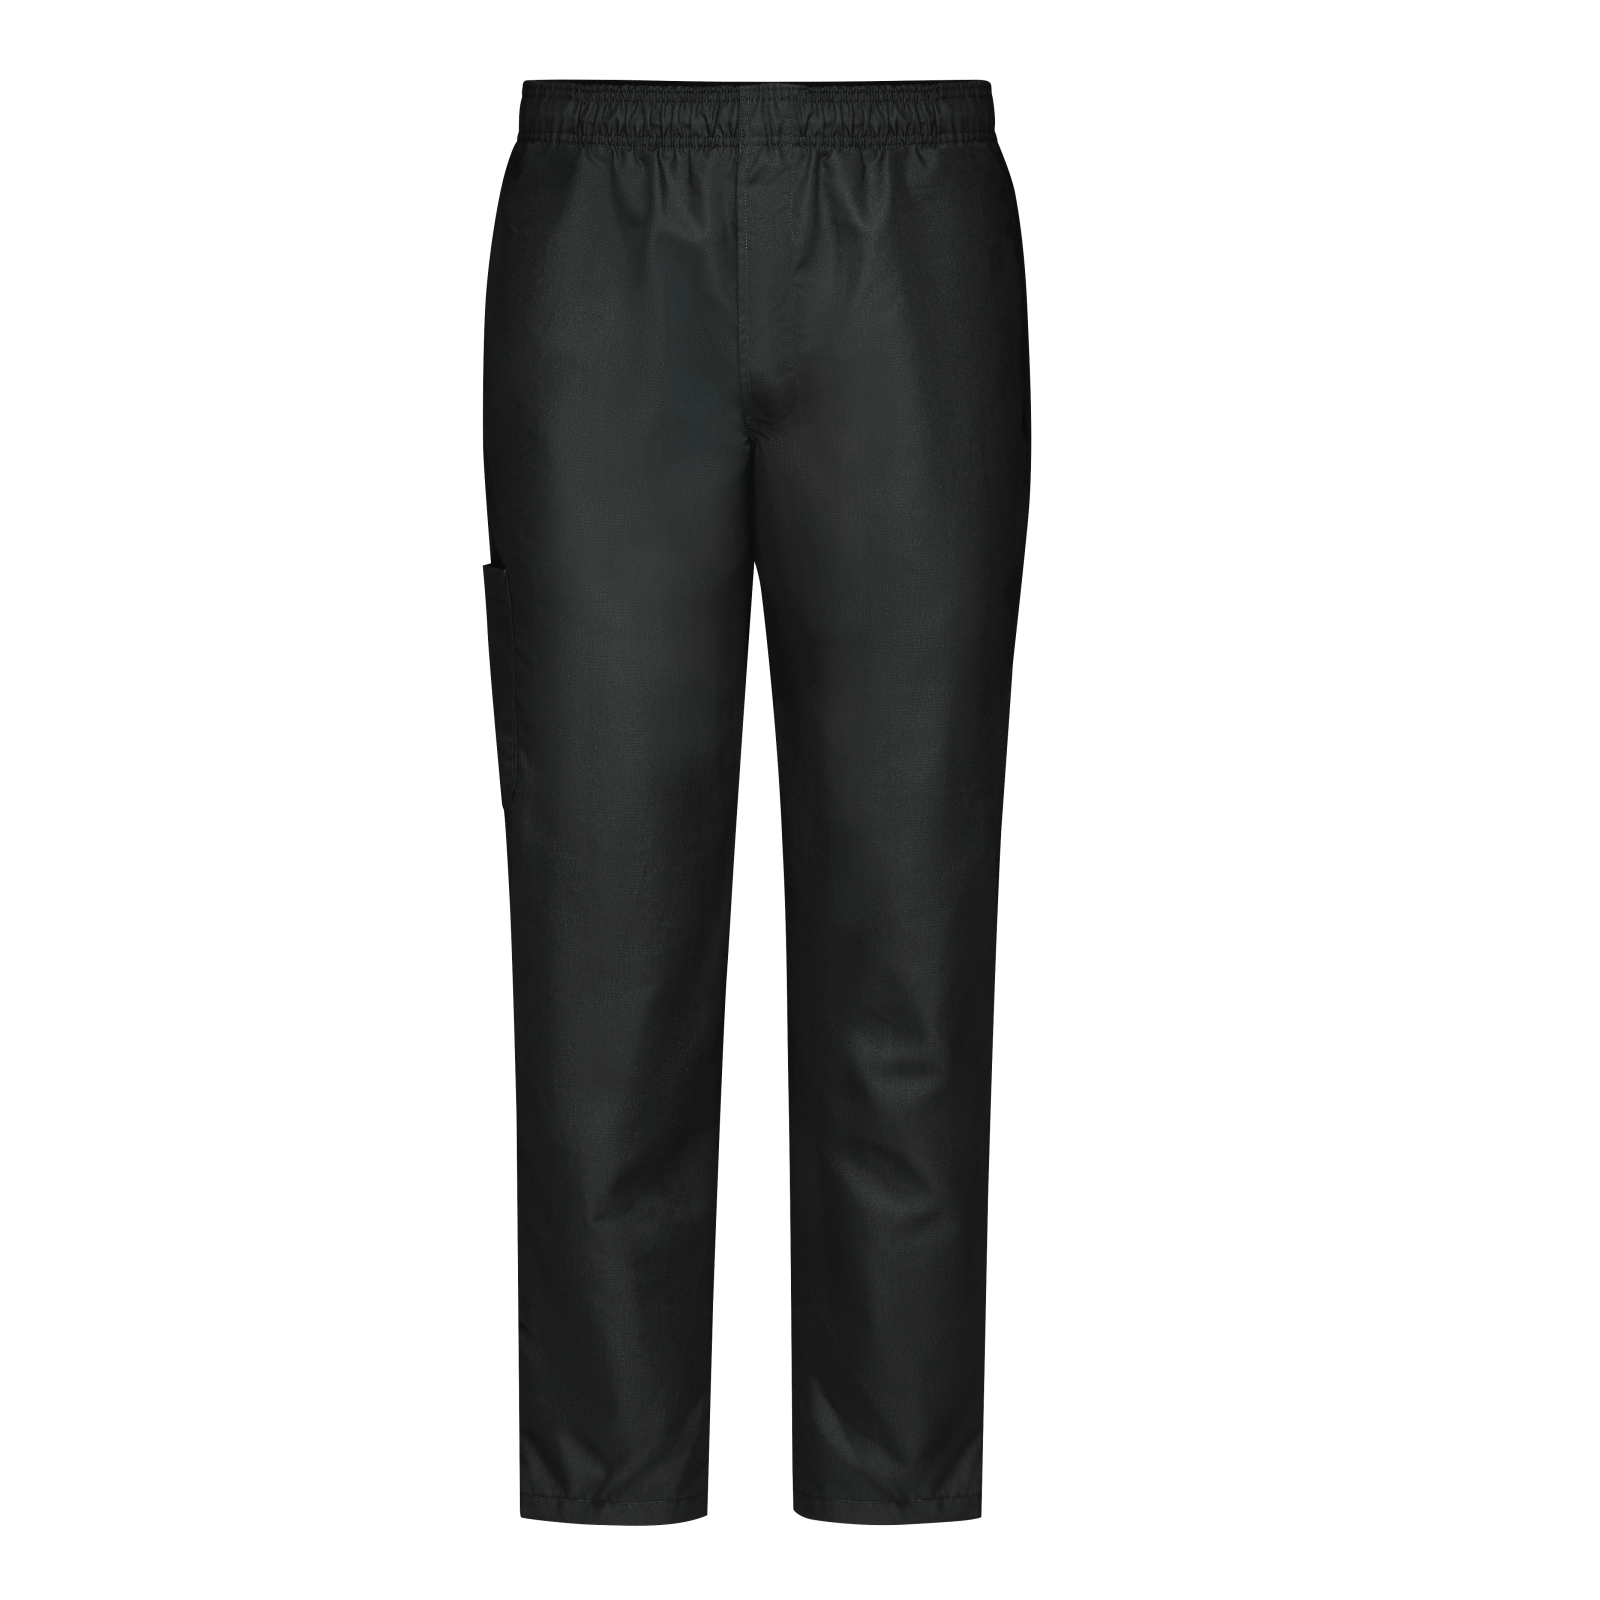 Mens Diehard Baggy Chef Pant with Zipper sizes XS-3XL 4001P Free Shipping 